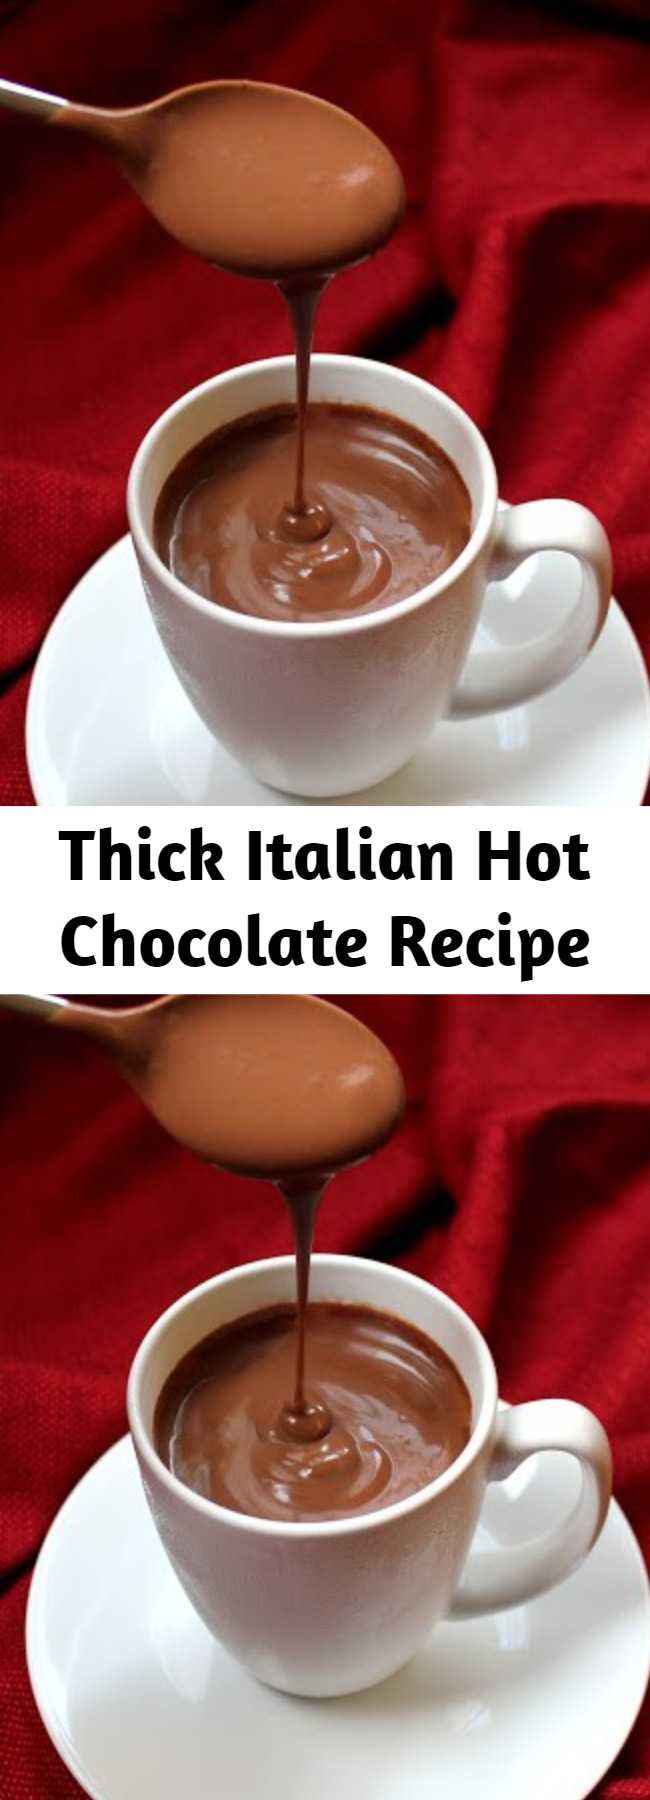 Thick Italian Hot Chocolate Recipe - This hot chocolate isn't for the faint of heart. It is rich, thick, and full of real chocolate. This is the kind of hot chocolate you make when you want to truly indulge! #hotchocolate #desserts